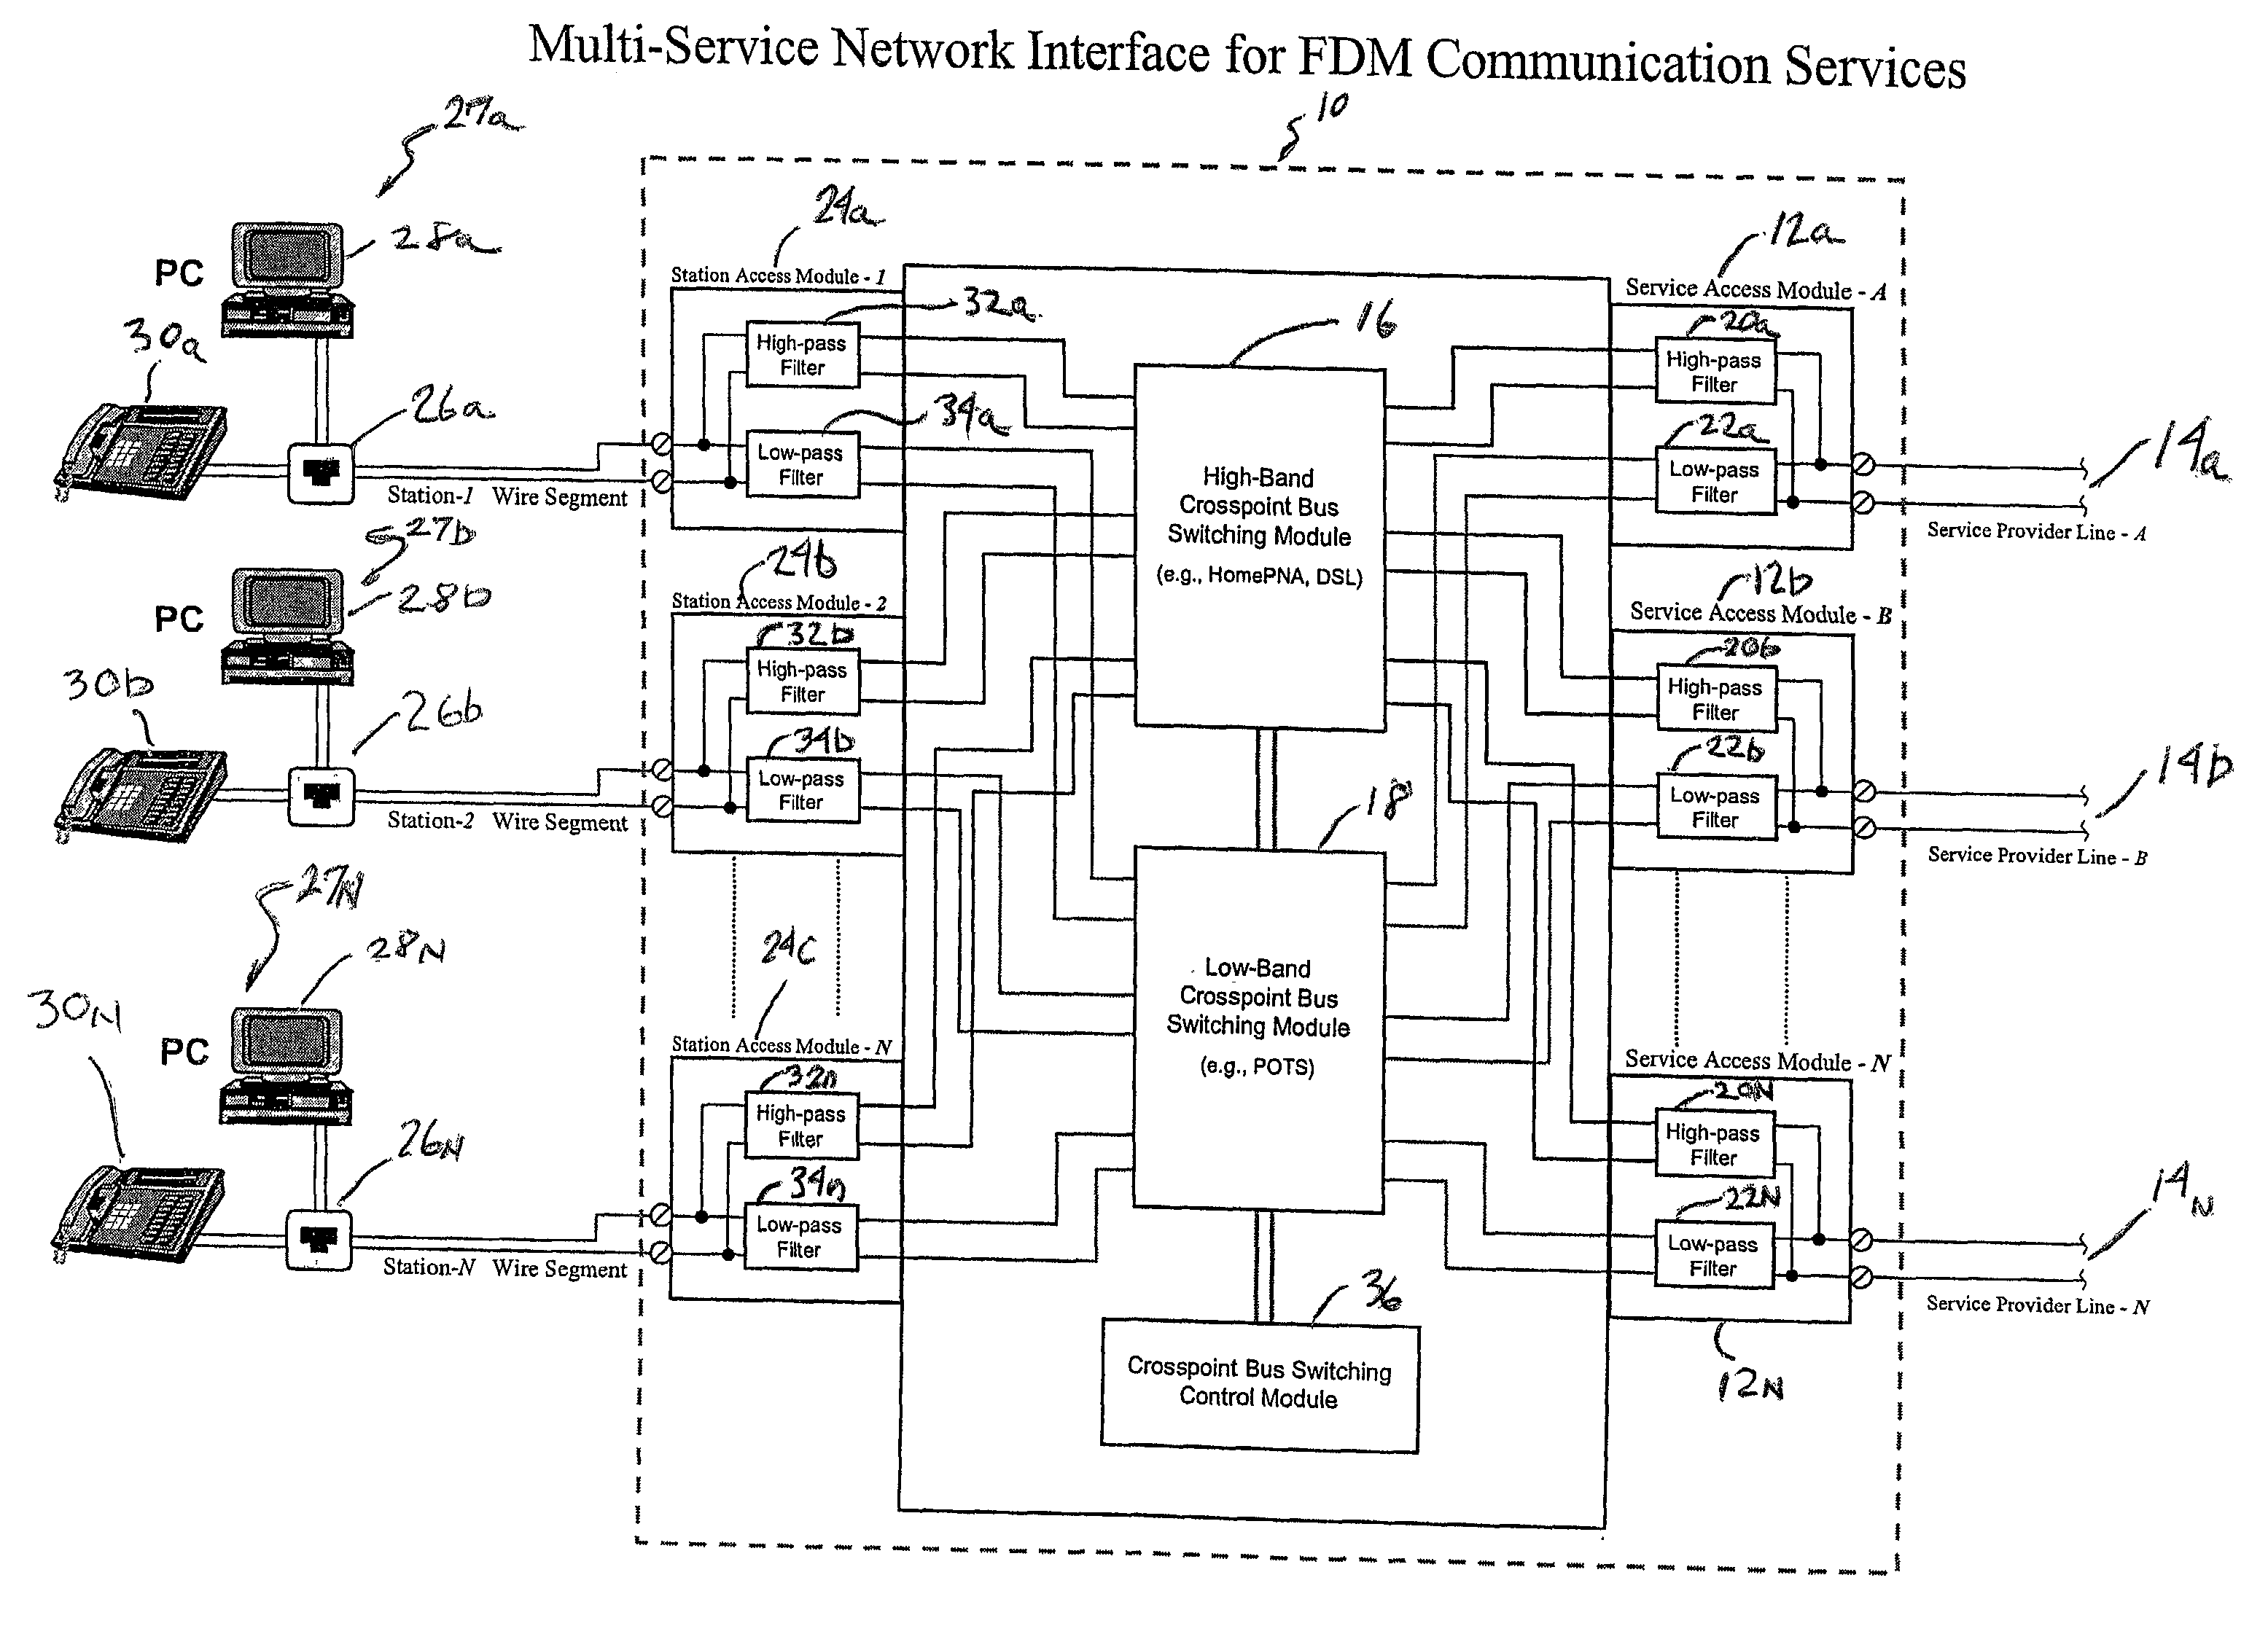 Multi-service network interface method for frequency-division multiplexed communications systems